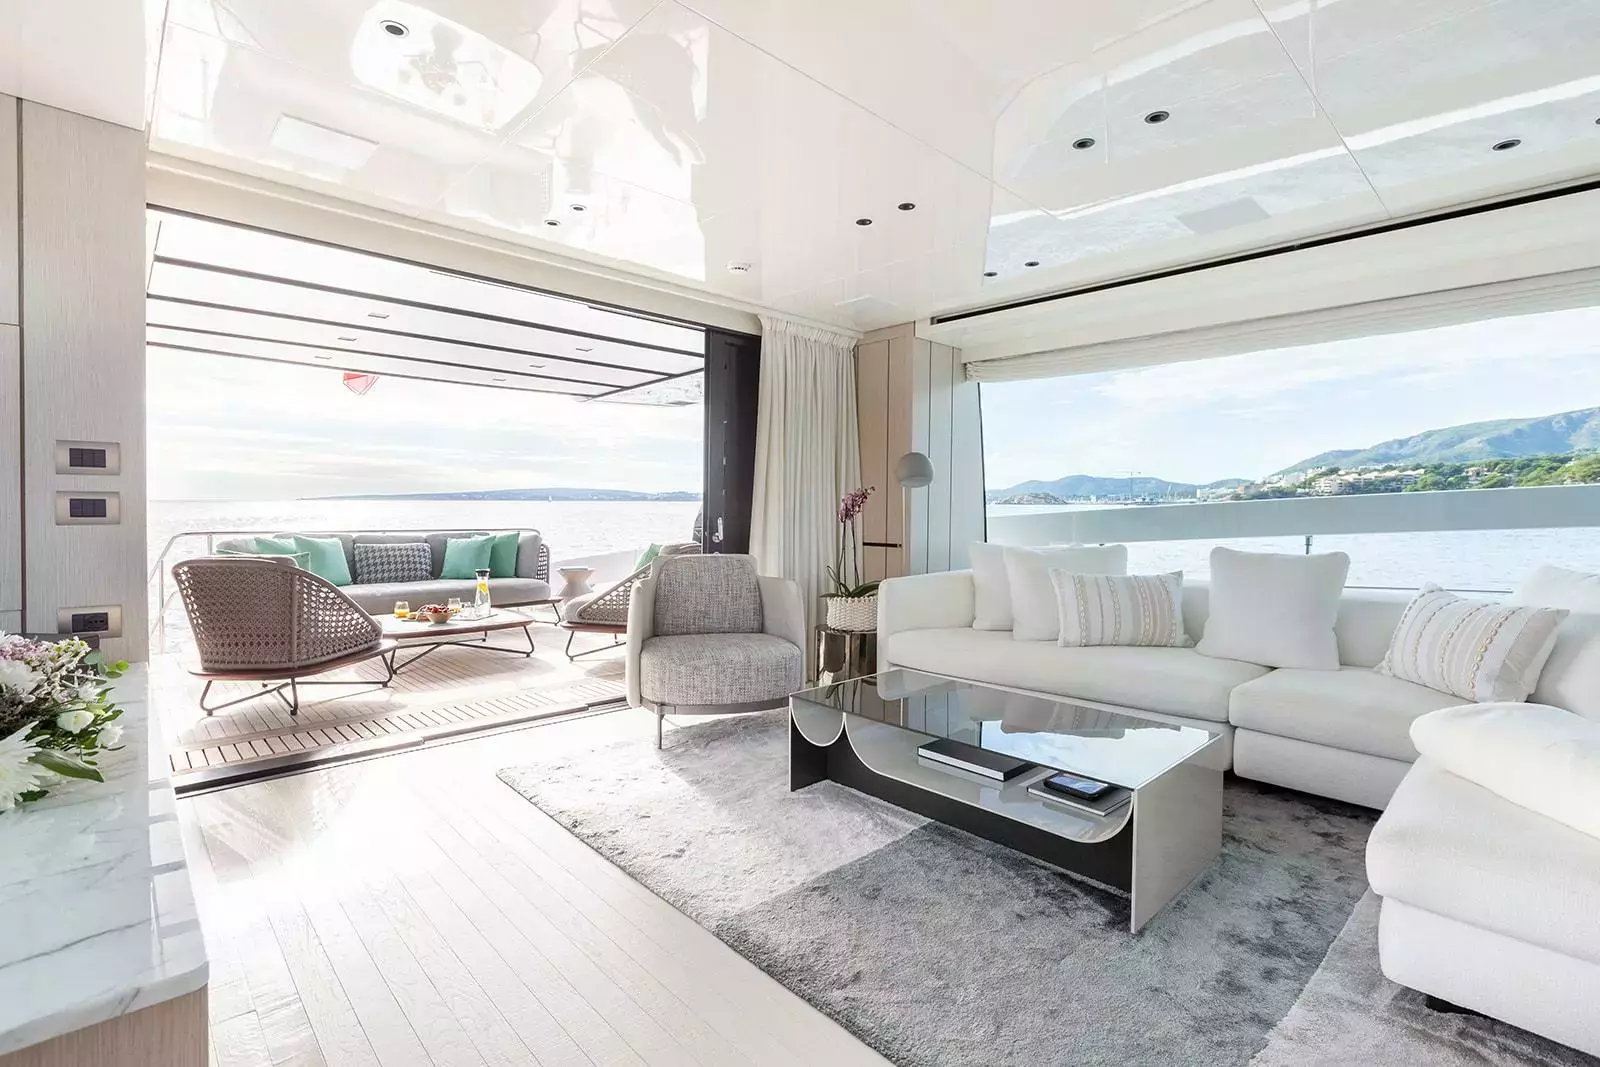 Cloud IX by Sanlorenzo - Special Offer for a private Motor Yacht Charter in Mallorca with a crew